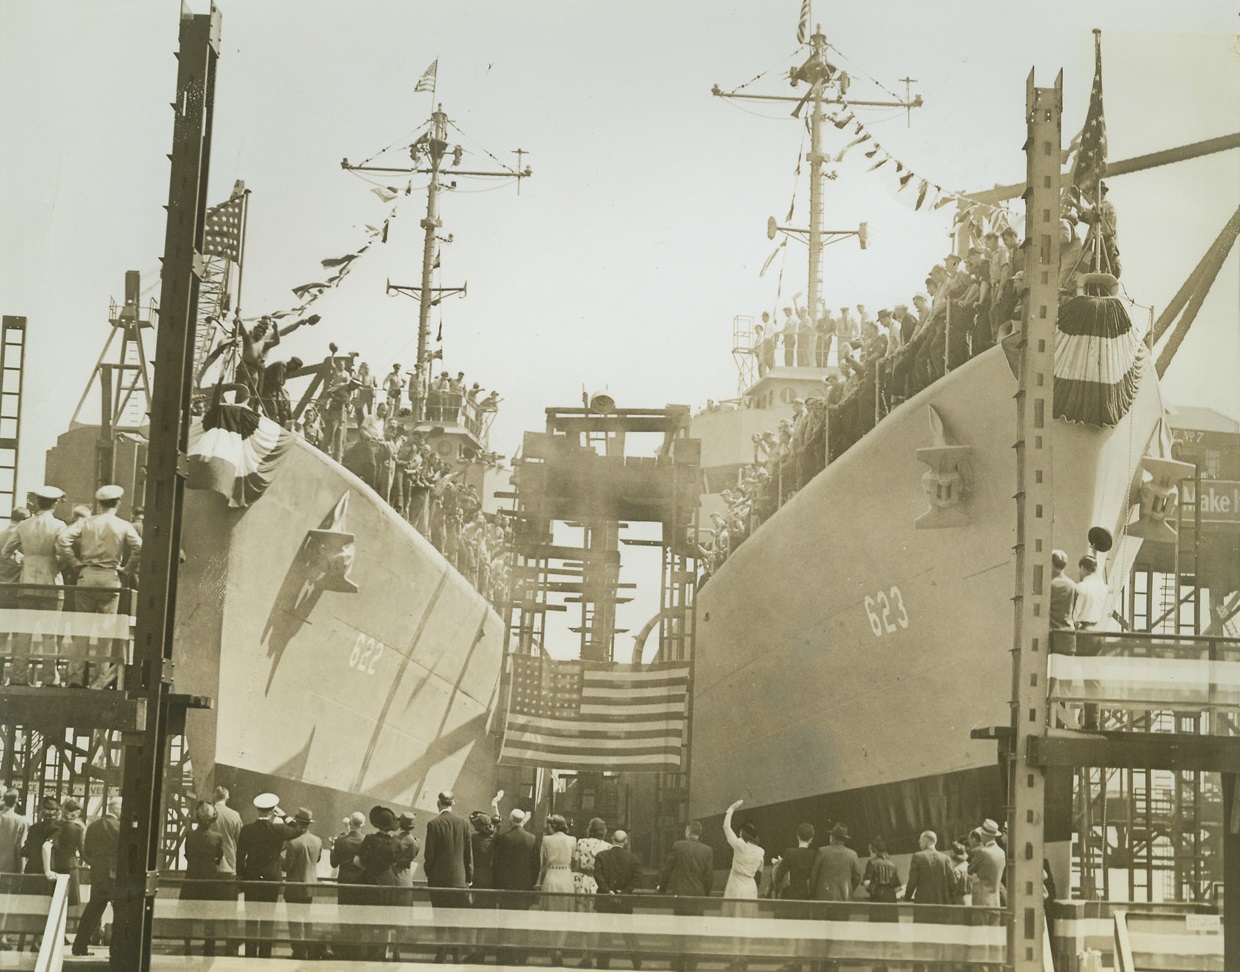 Two Destroyers Launched at Kearny, 9/15/1942. Kearny, N.J. – The U.S.S. Maddox, named in honor of the late Capt. William A. T. Maddox of the Marine Corps, slides down the ways at the Federal Shipbuilding and Dry Dock Company Yards Sept. 15. The U.S.S. Nelson, which was launched a few minutes later, can be seen on the right. Credit: ACME;